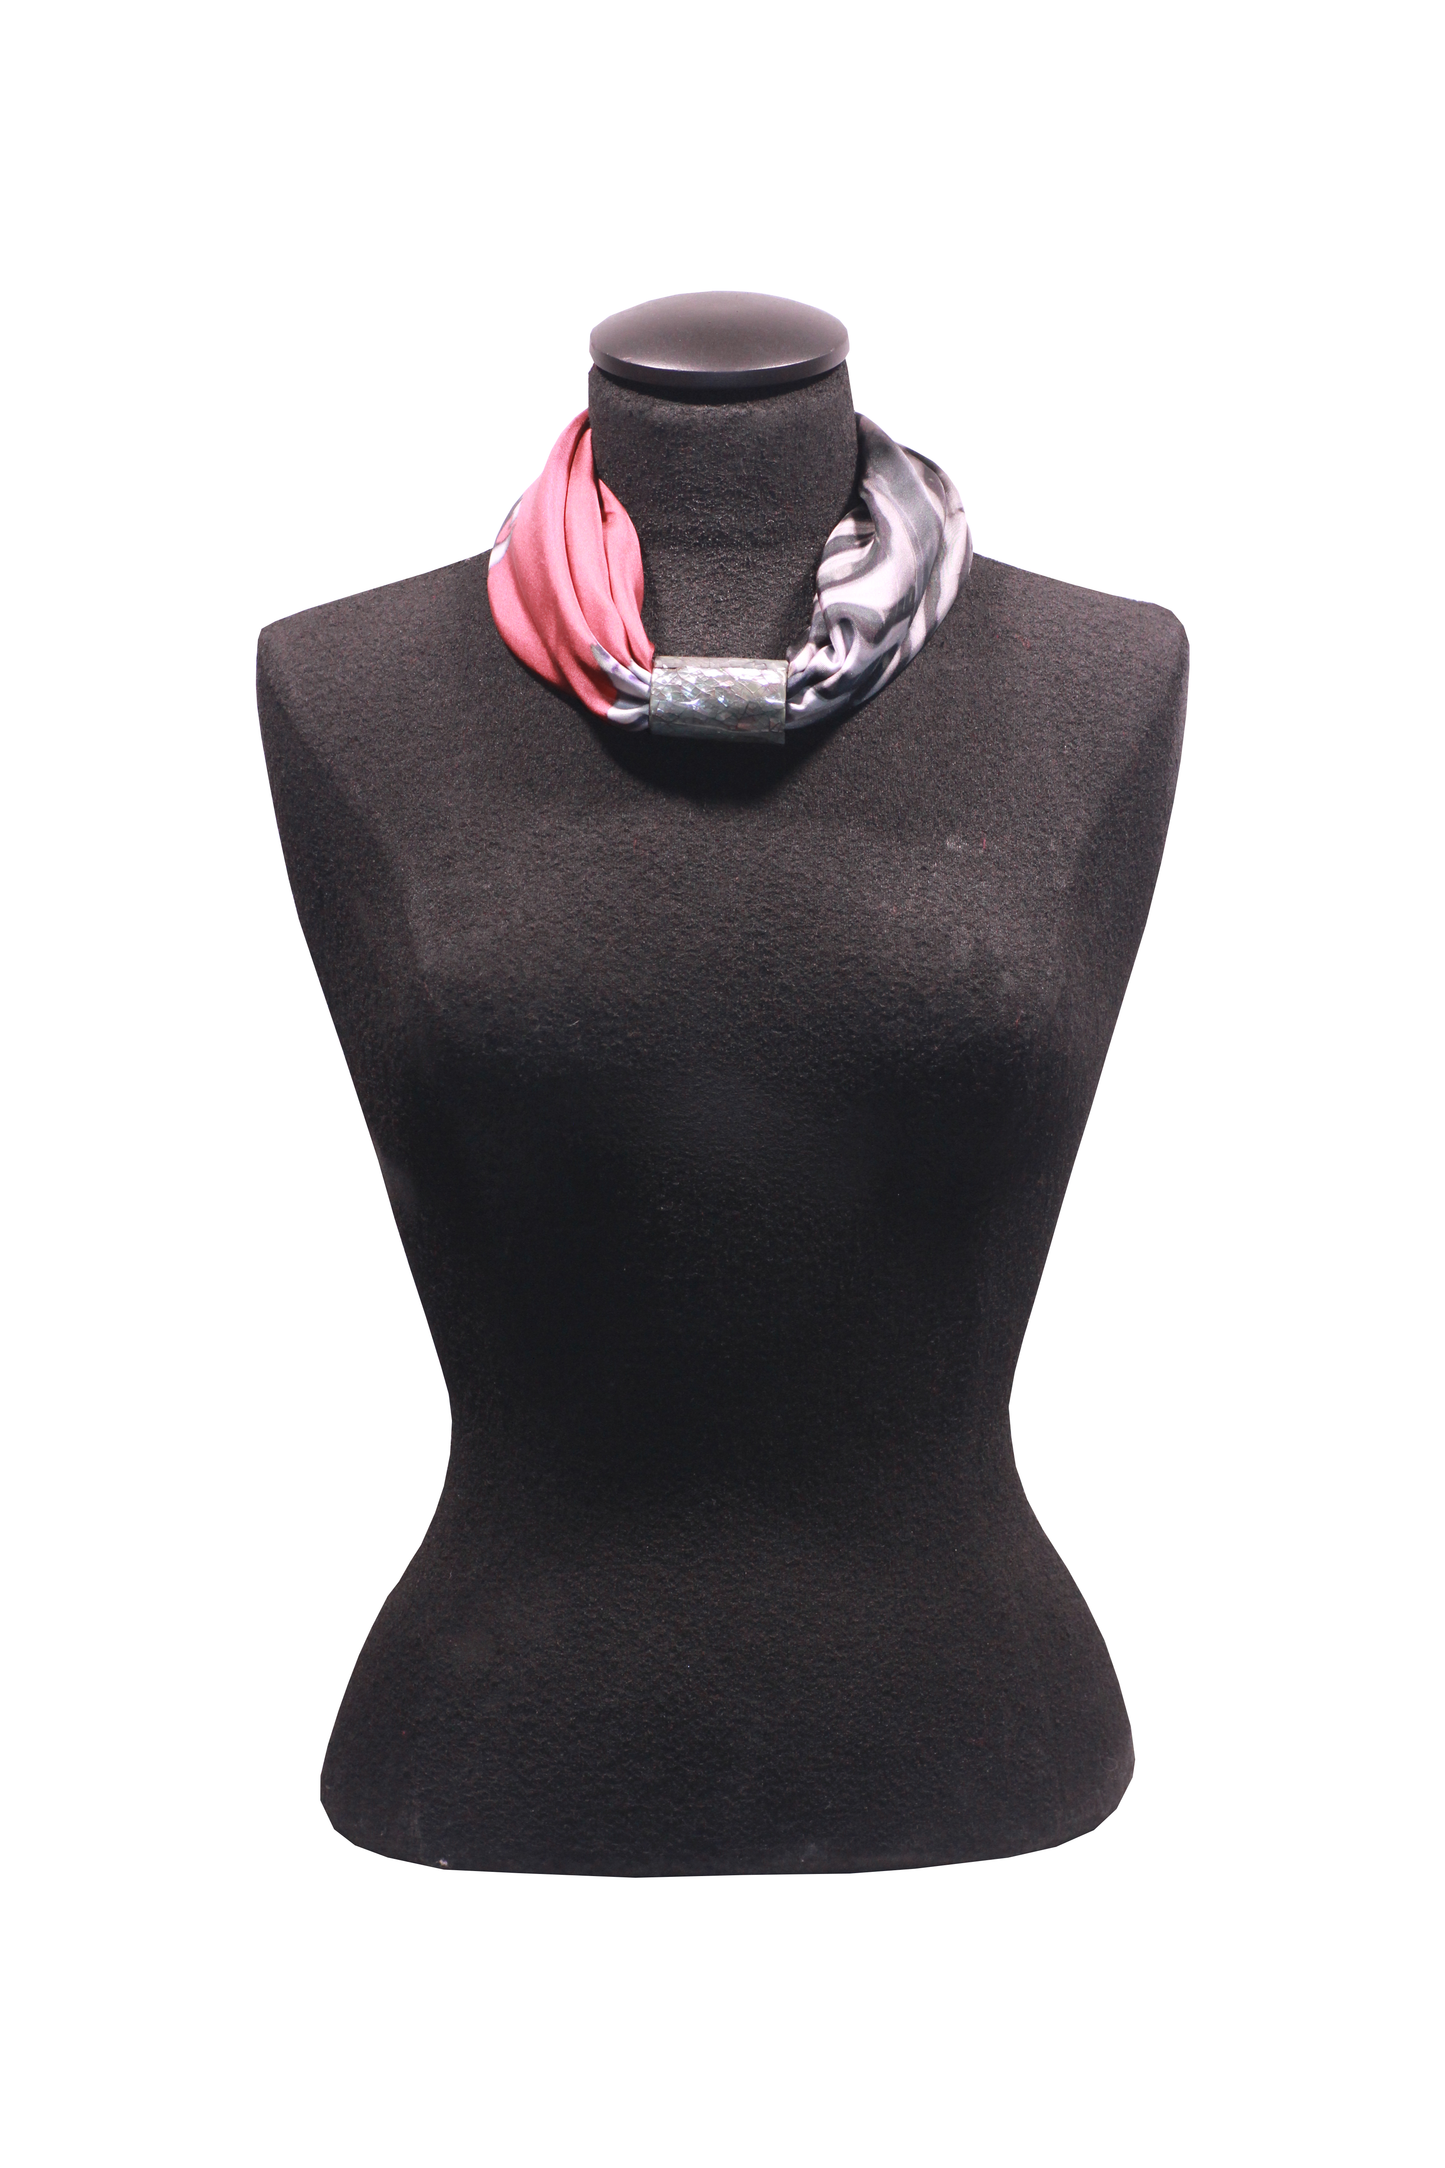 Black Mother of Pearl Scarf Ring/Pendant - Tube